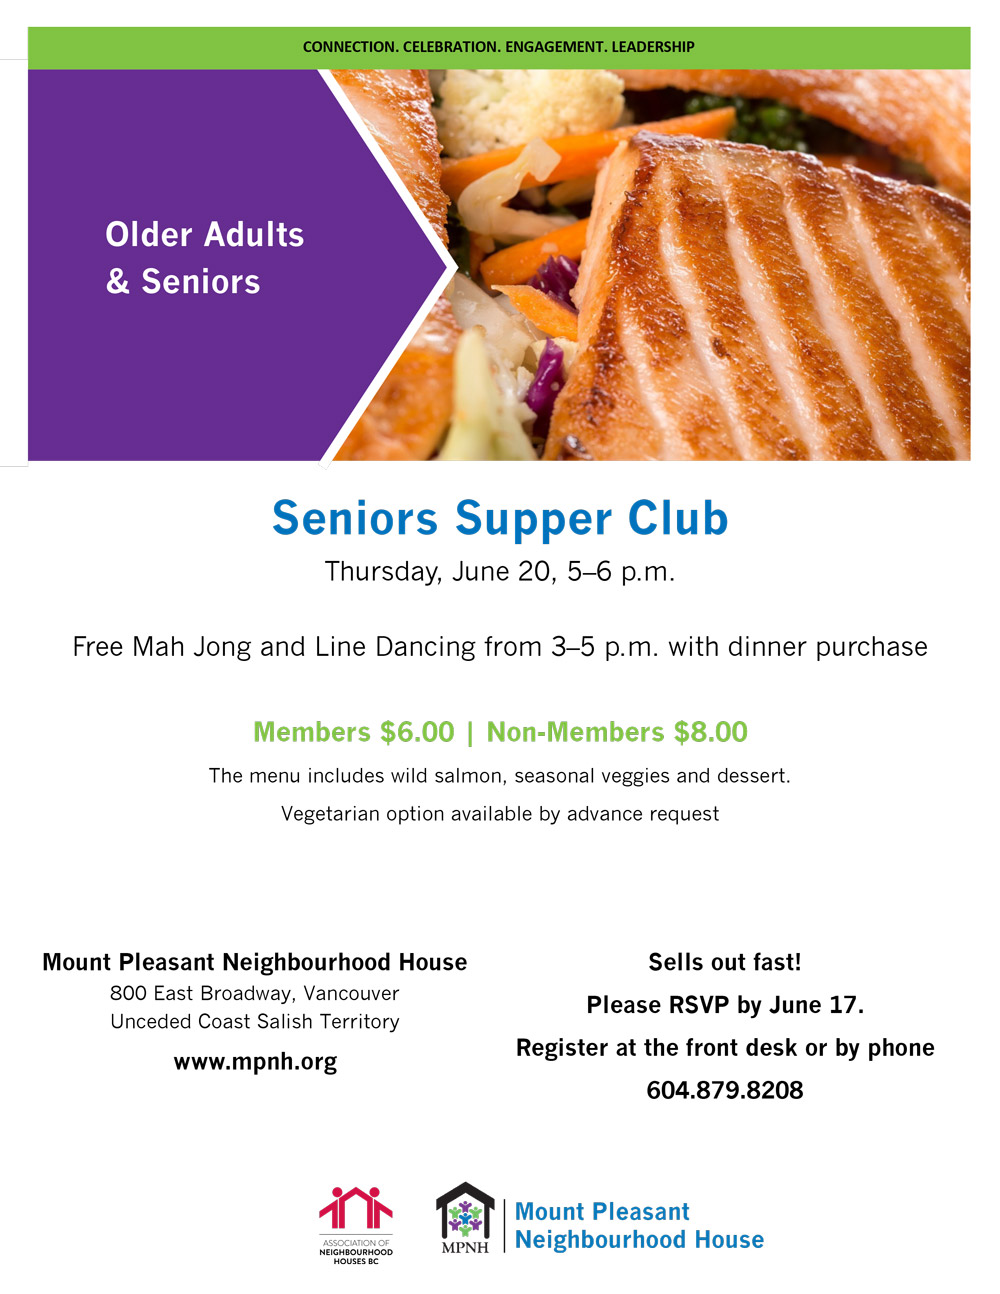 An image of the poster with event details, featuring a picture of grilled salmon and vegetables.